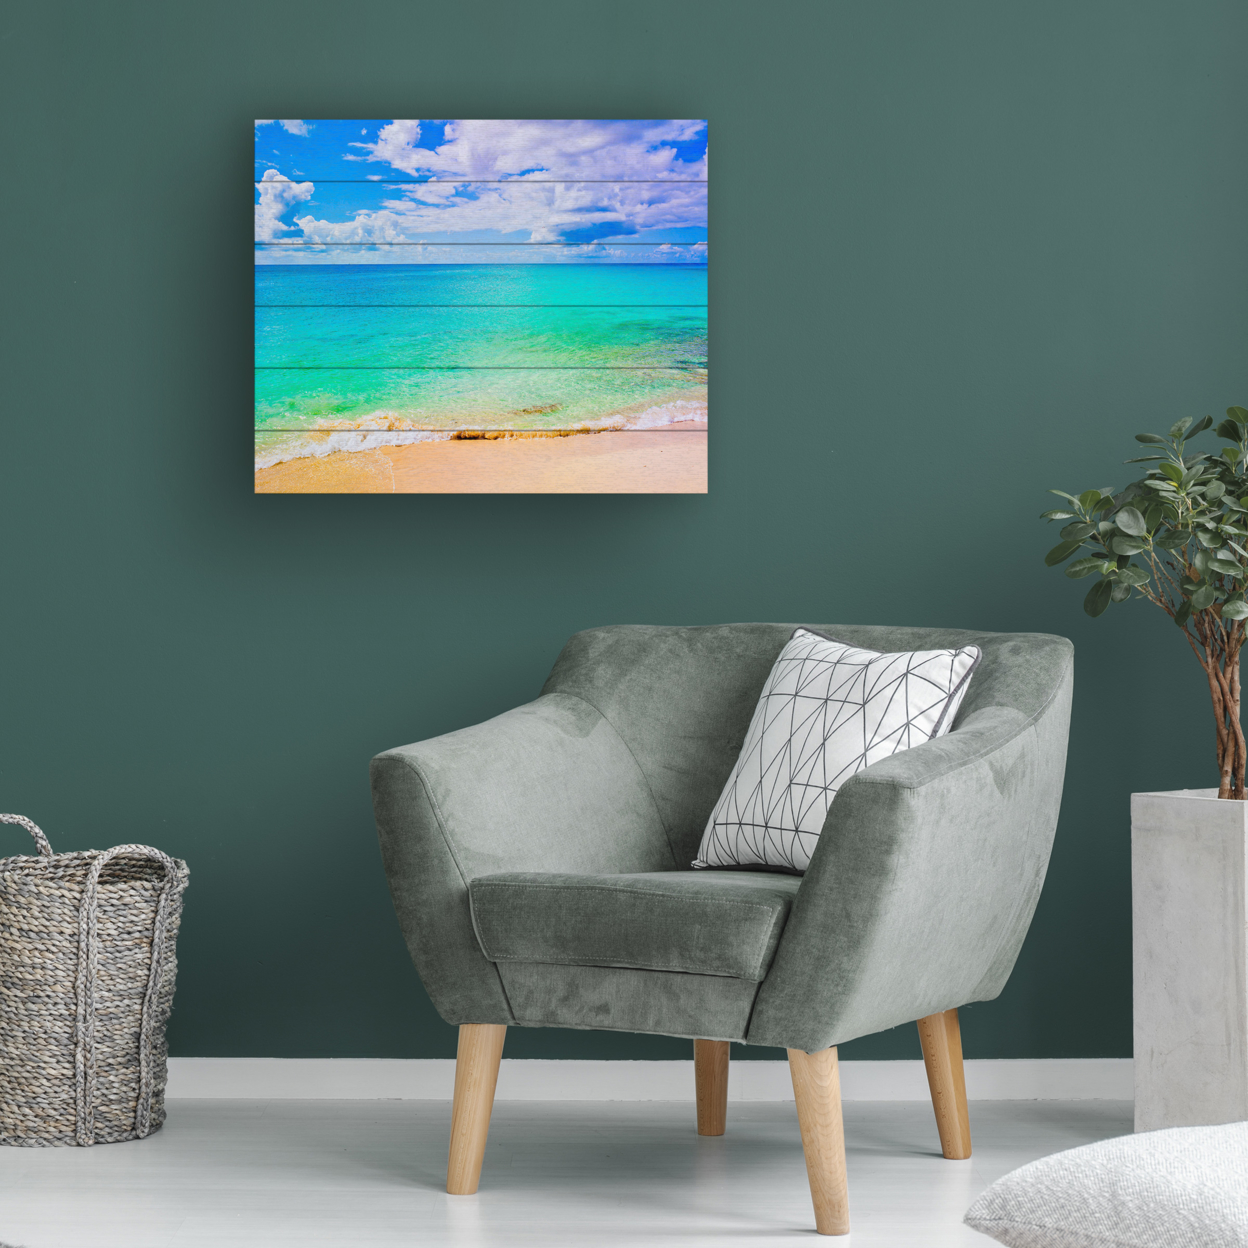 Wooden Slat Art 18 X 22 Inches Titled Maho Beach Ready To Hang Home Decor Picture